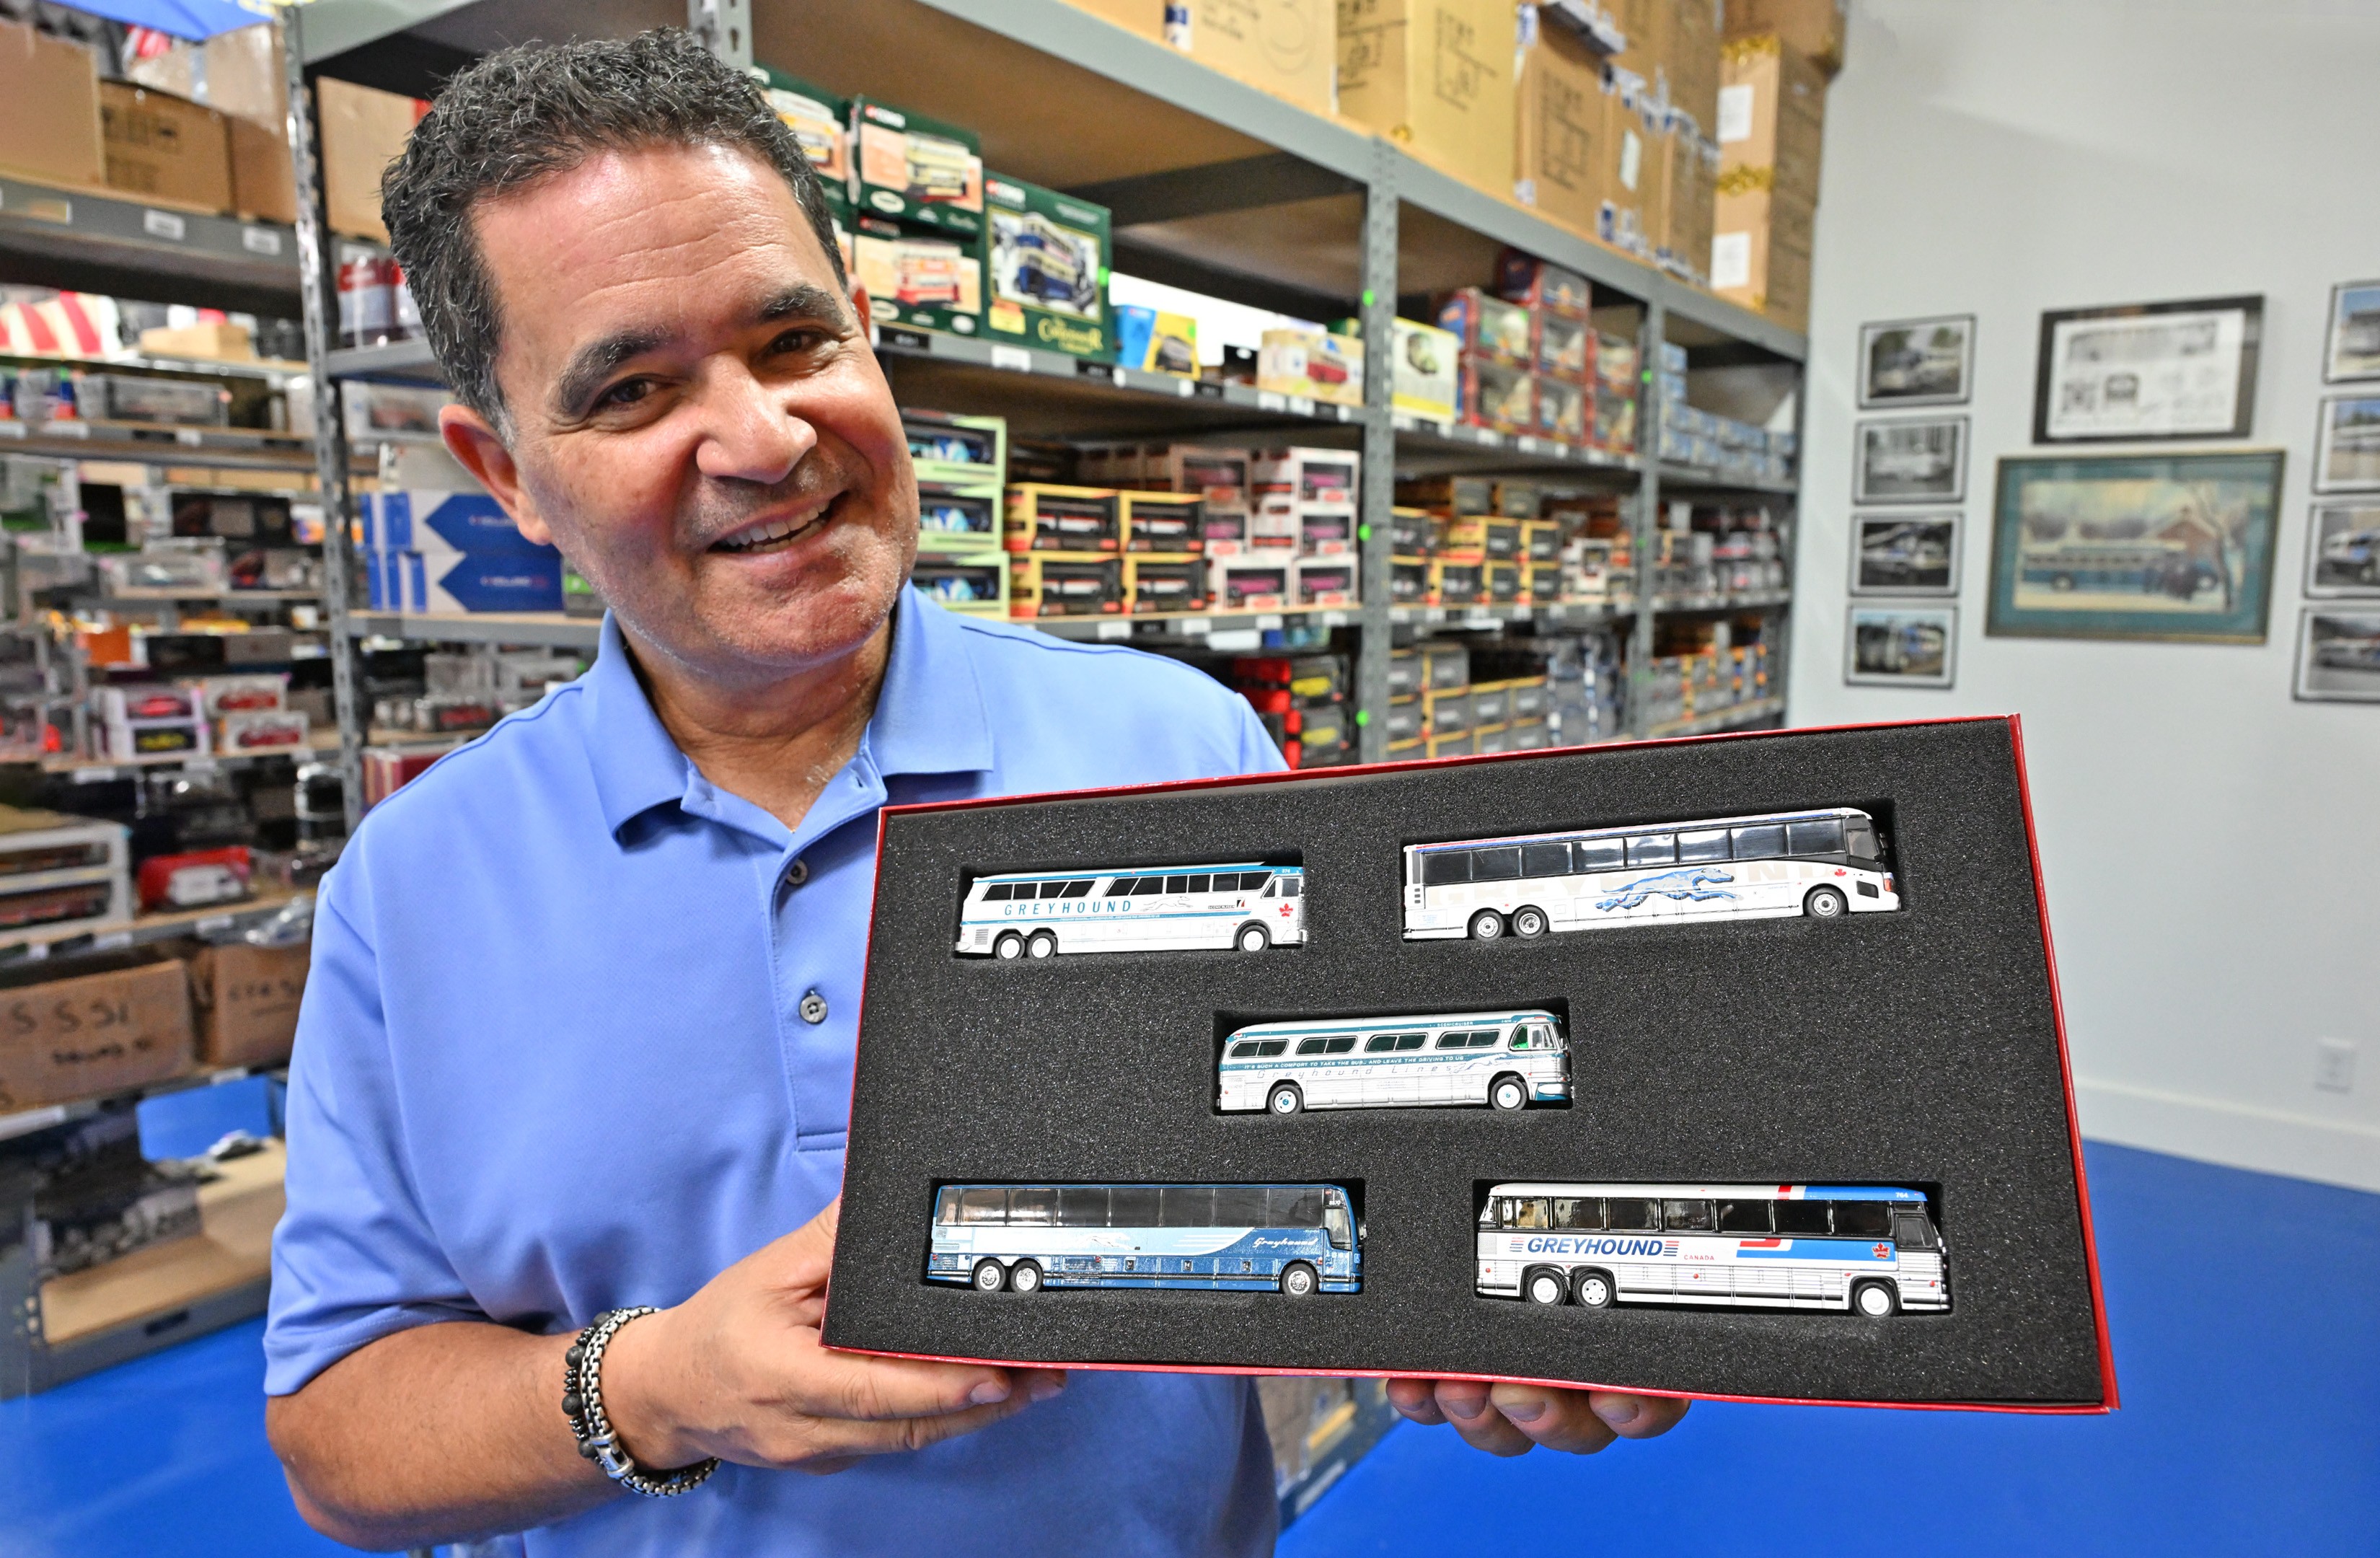 Awesome Diecast Has Made A Business Out Of Collecting Scale Models